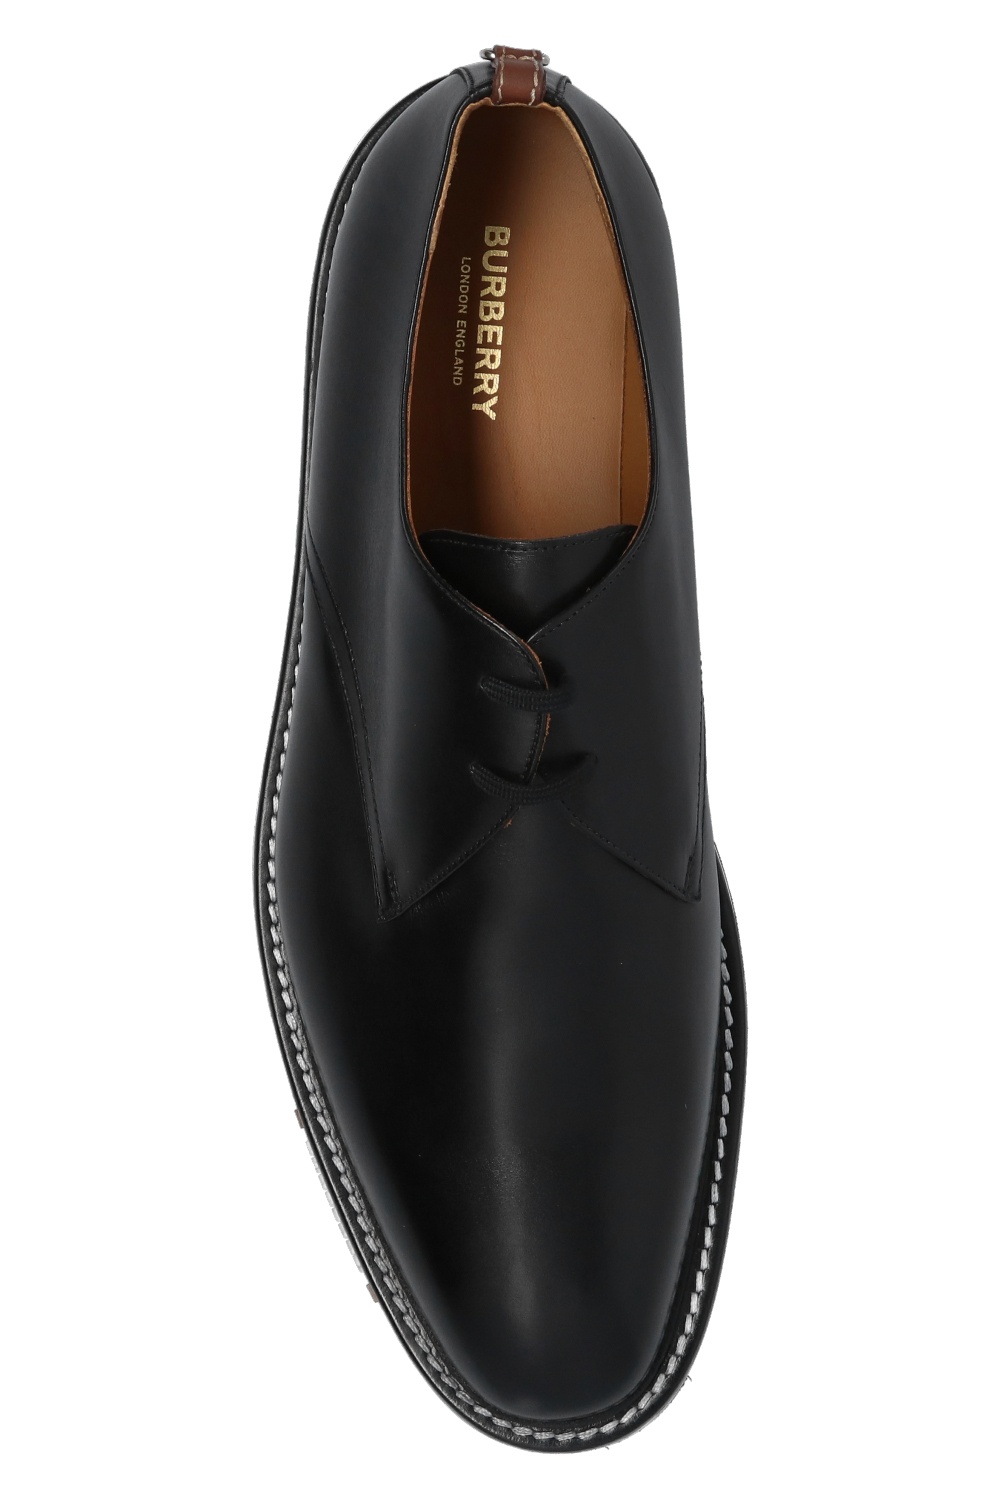 Burberry Leather shoes